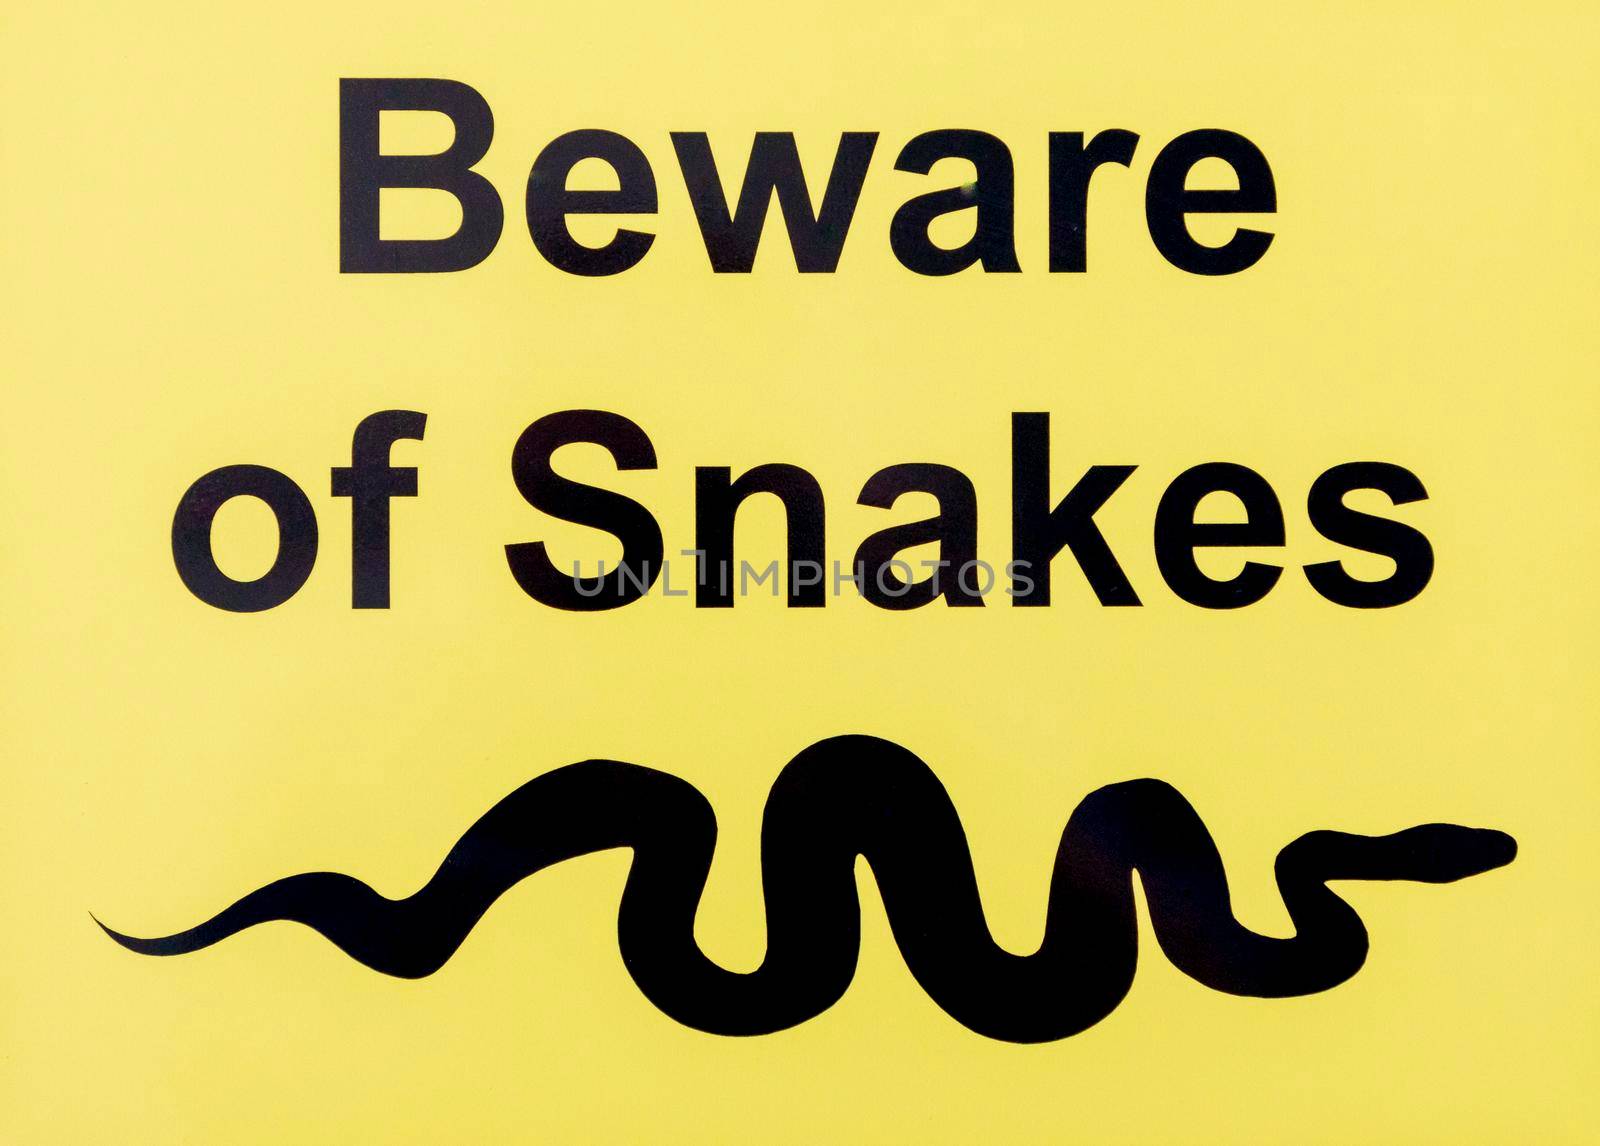 A beware of snakes sign by WittkePhotos